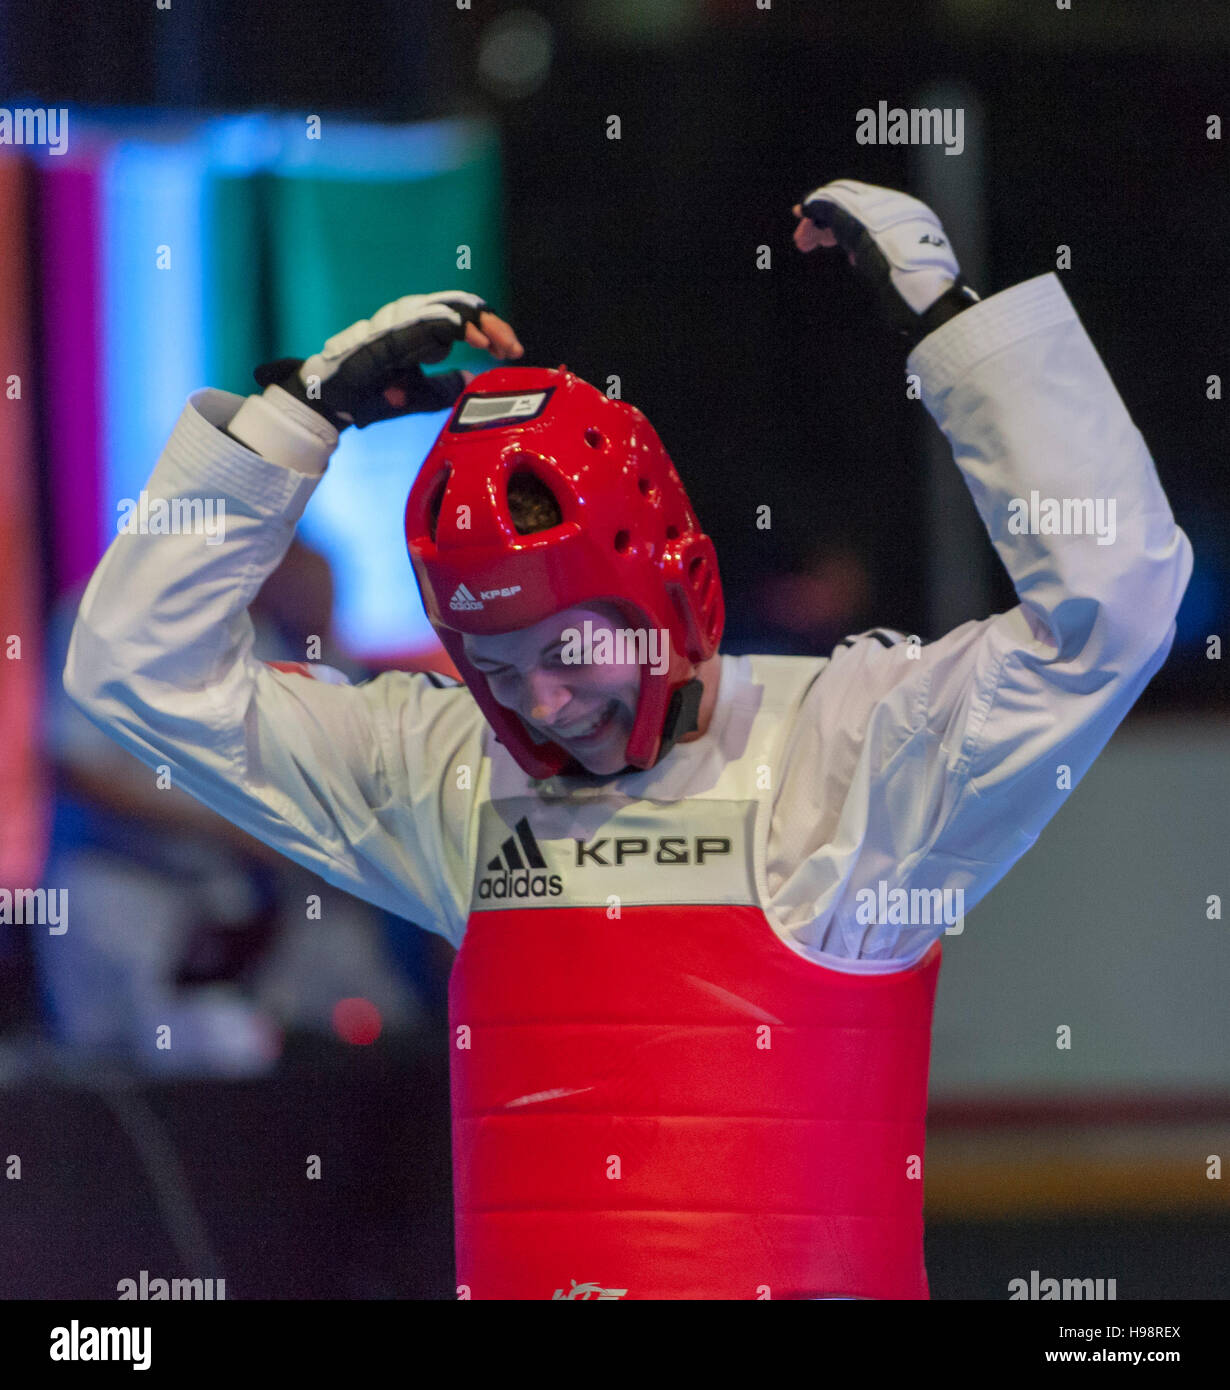 Burnaby, Canada. 19 November, 2016. WTF World Taekwondo Junior Championships Mousa Al-Kwaldeh (JOR) and Hiebert Zachary (CAN) red compete in the male 73kg Alamy Live News/Peter Llewellyn Stock Photo